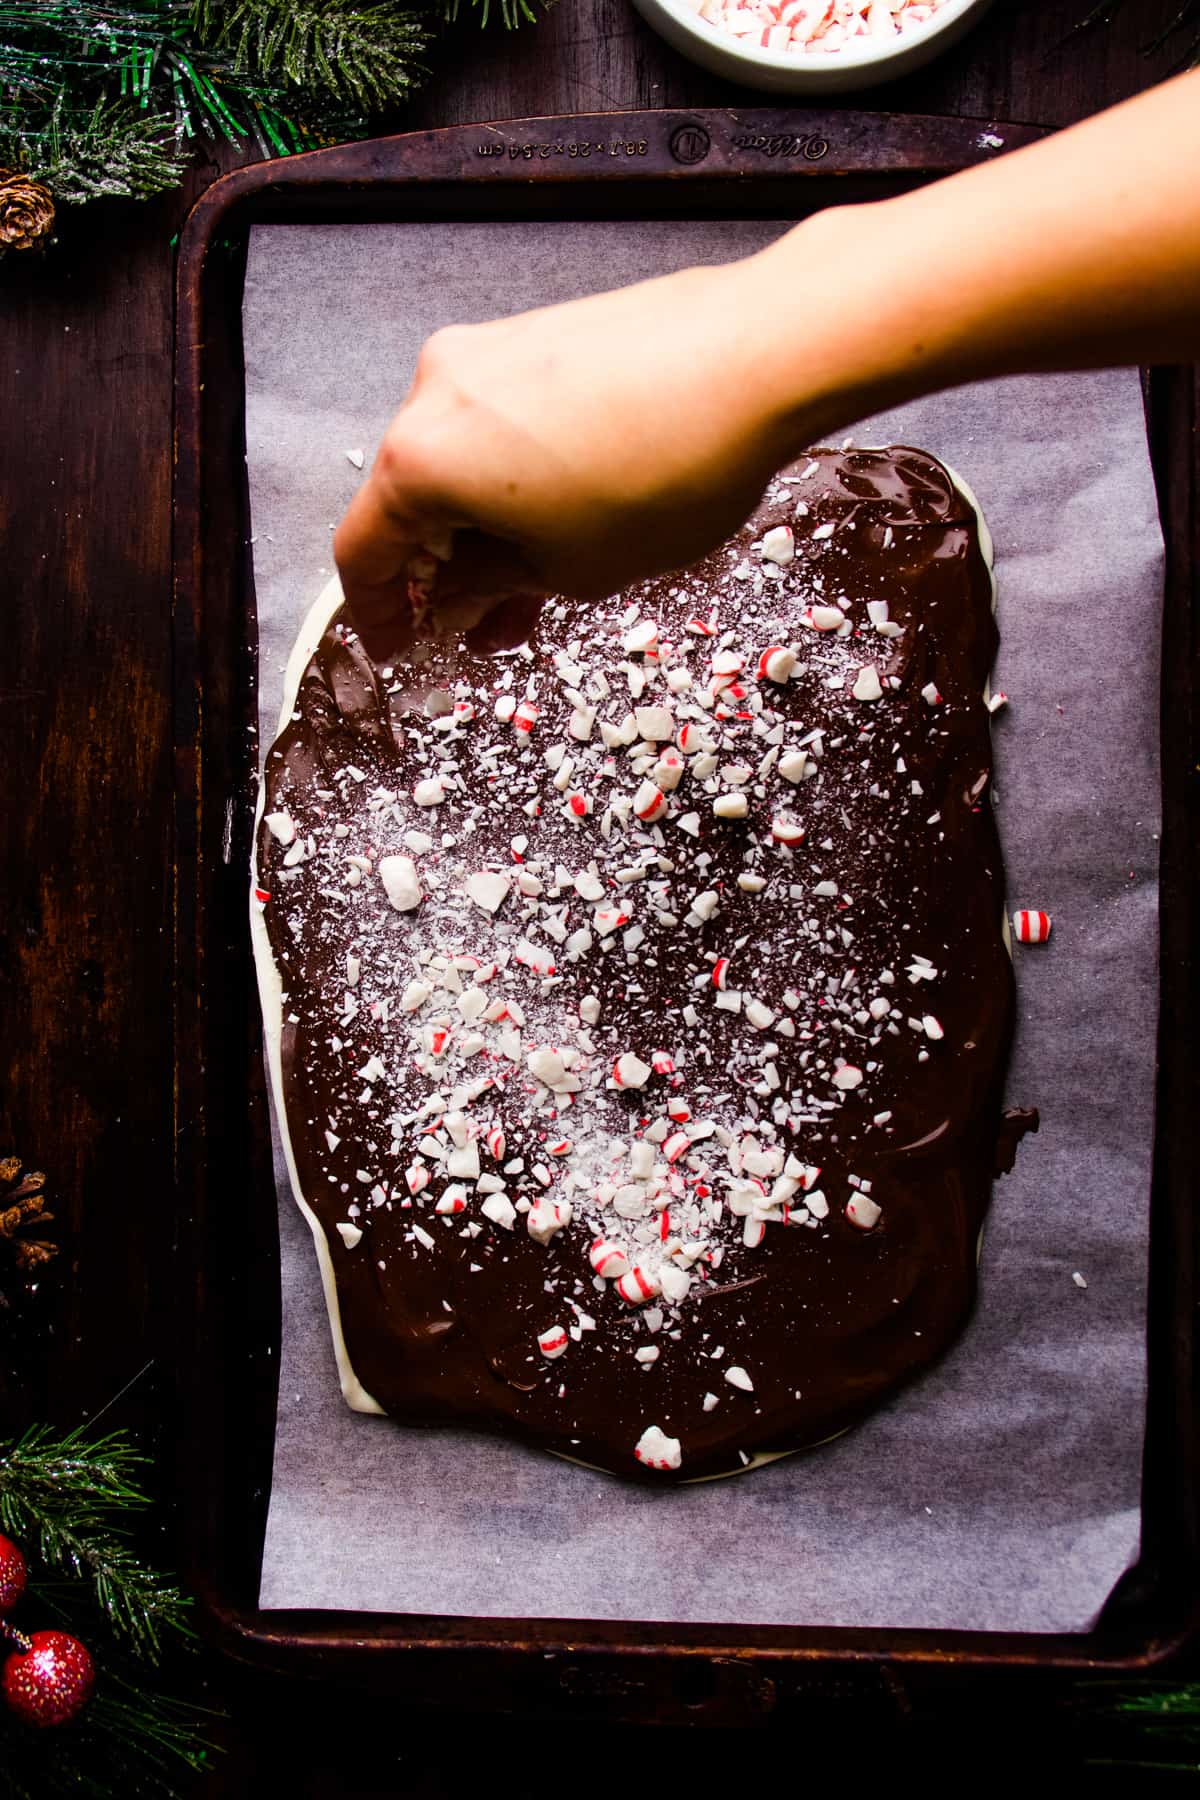 A person is sprinkling crushed peppermint on top of peppermint chocolate on a baking sheet.